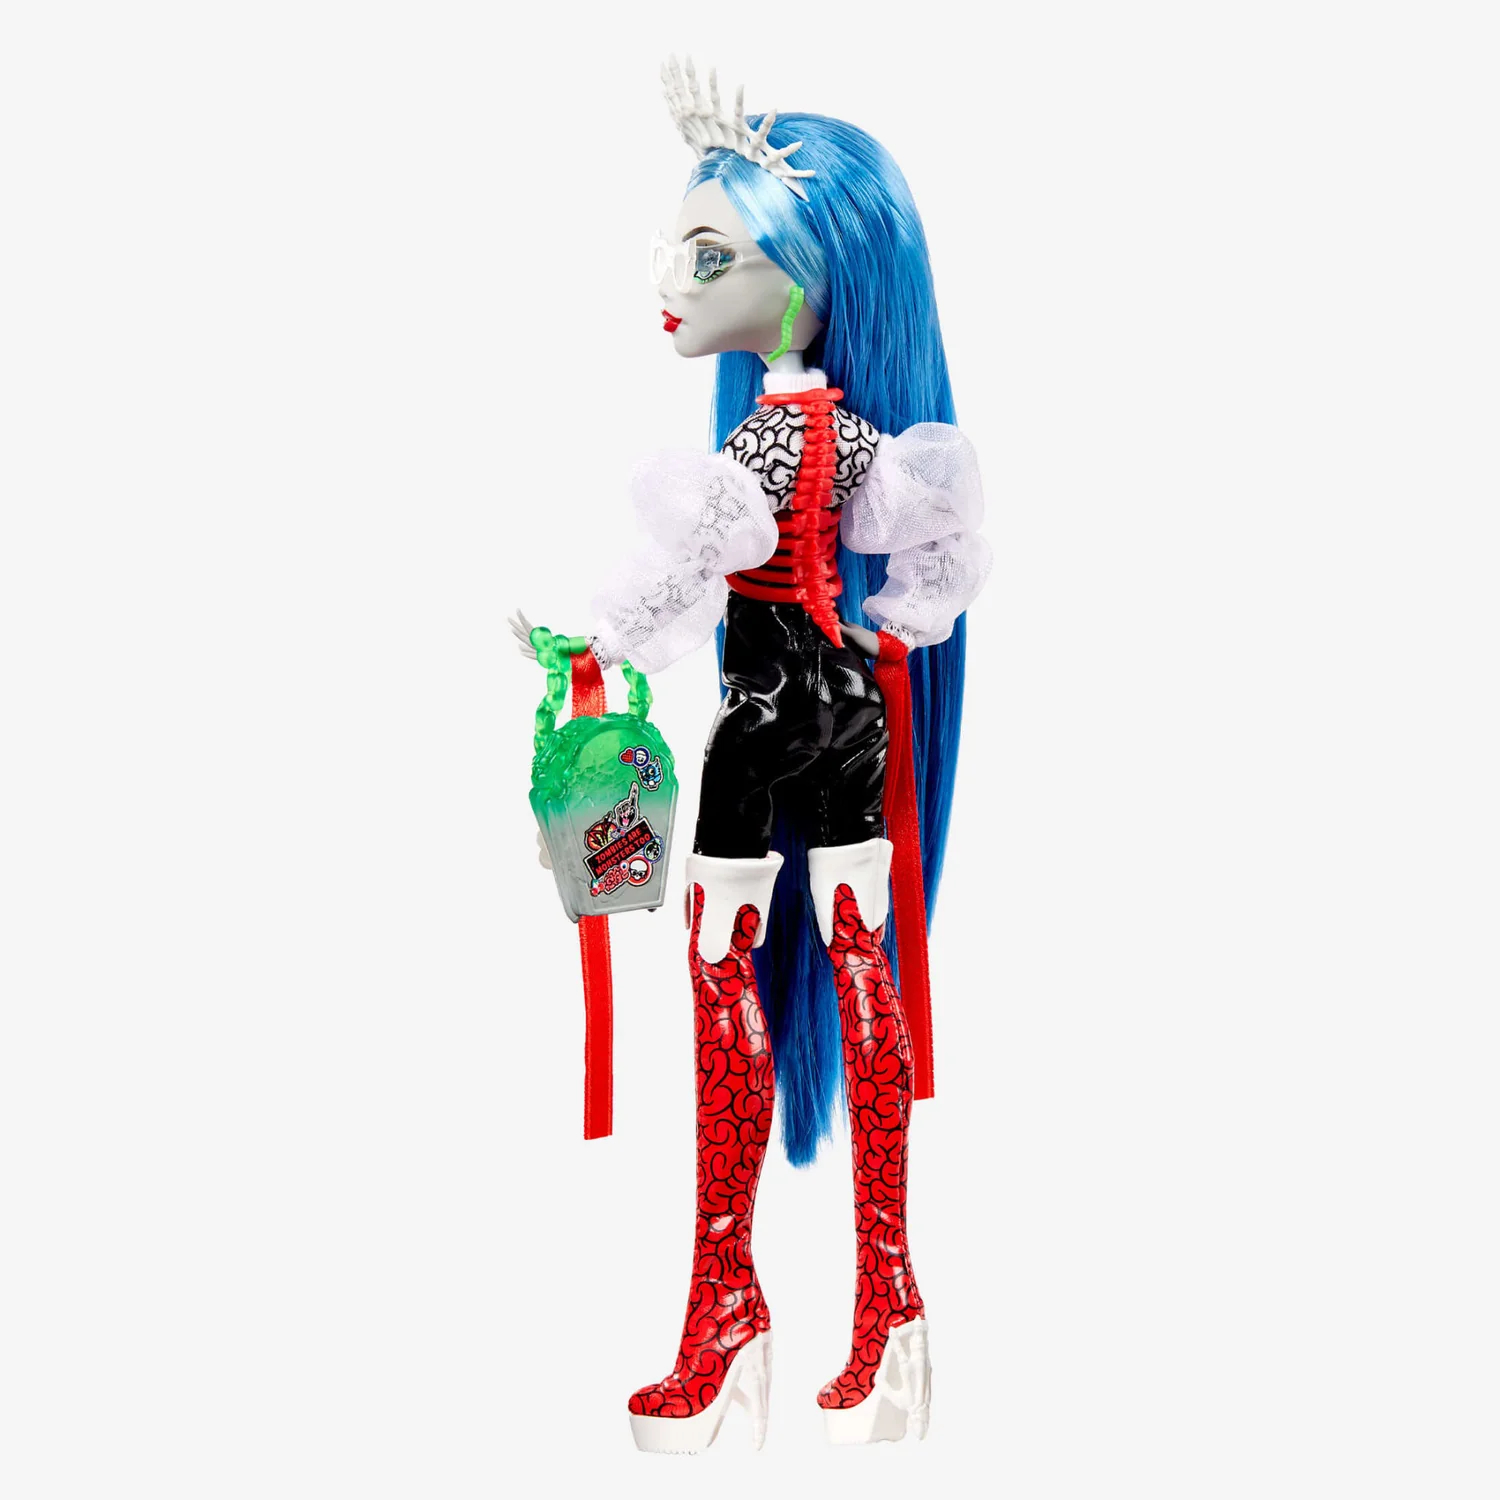 ensalada General este Chico Muñeca on Twitter: "Monster High Collectors Ghouluxe Ghoulia Yelps  Doll. Dropping this Friday at Mattel creations exclusively for the fang  club members for $50 / 58€ https://t.co/DpuZ0rNRIR" / Twitter